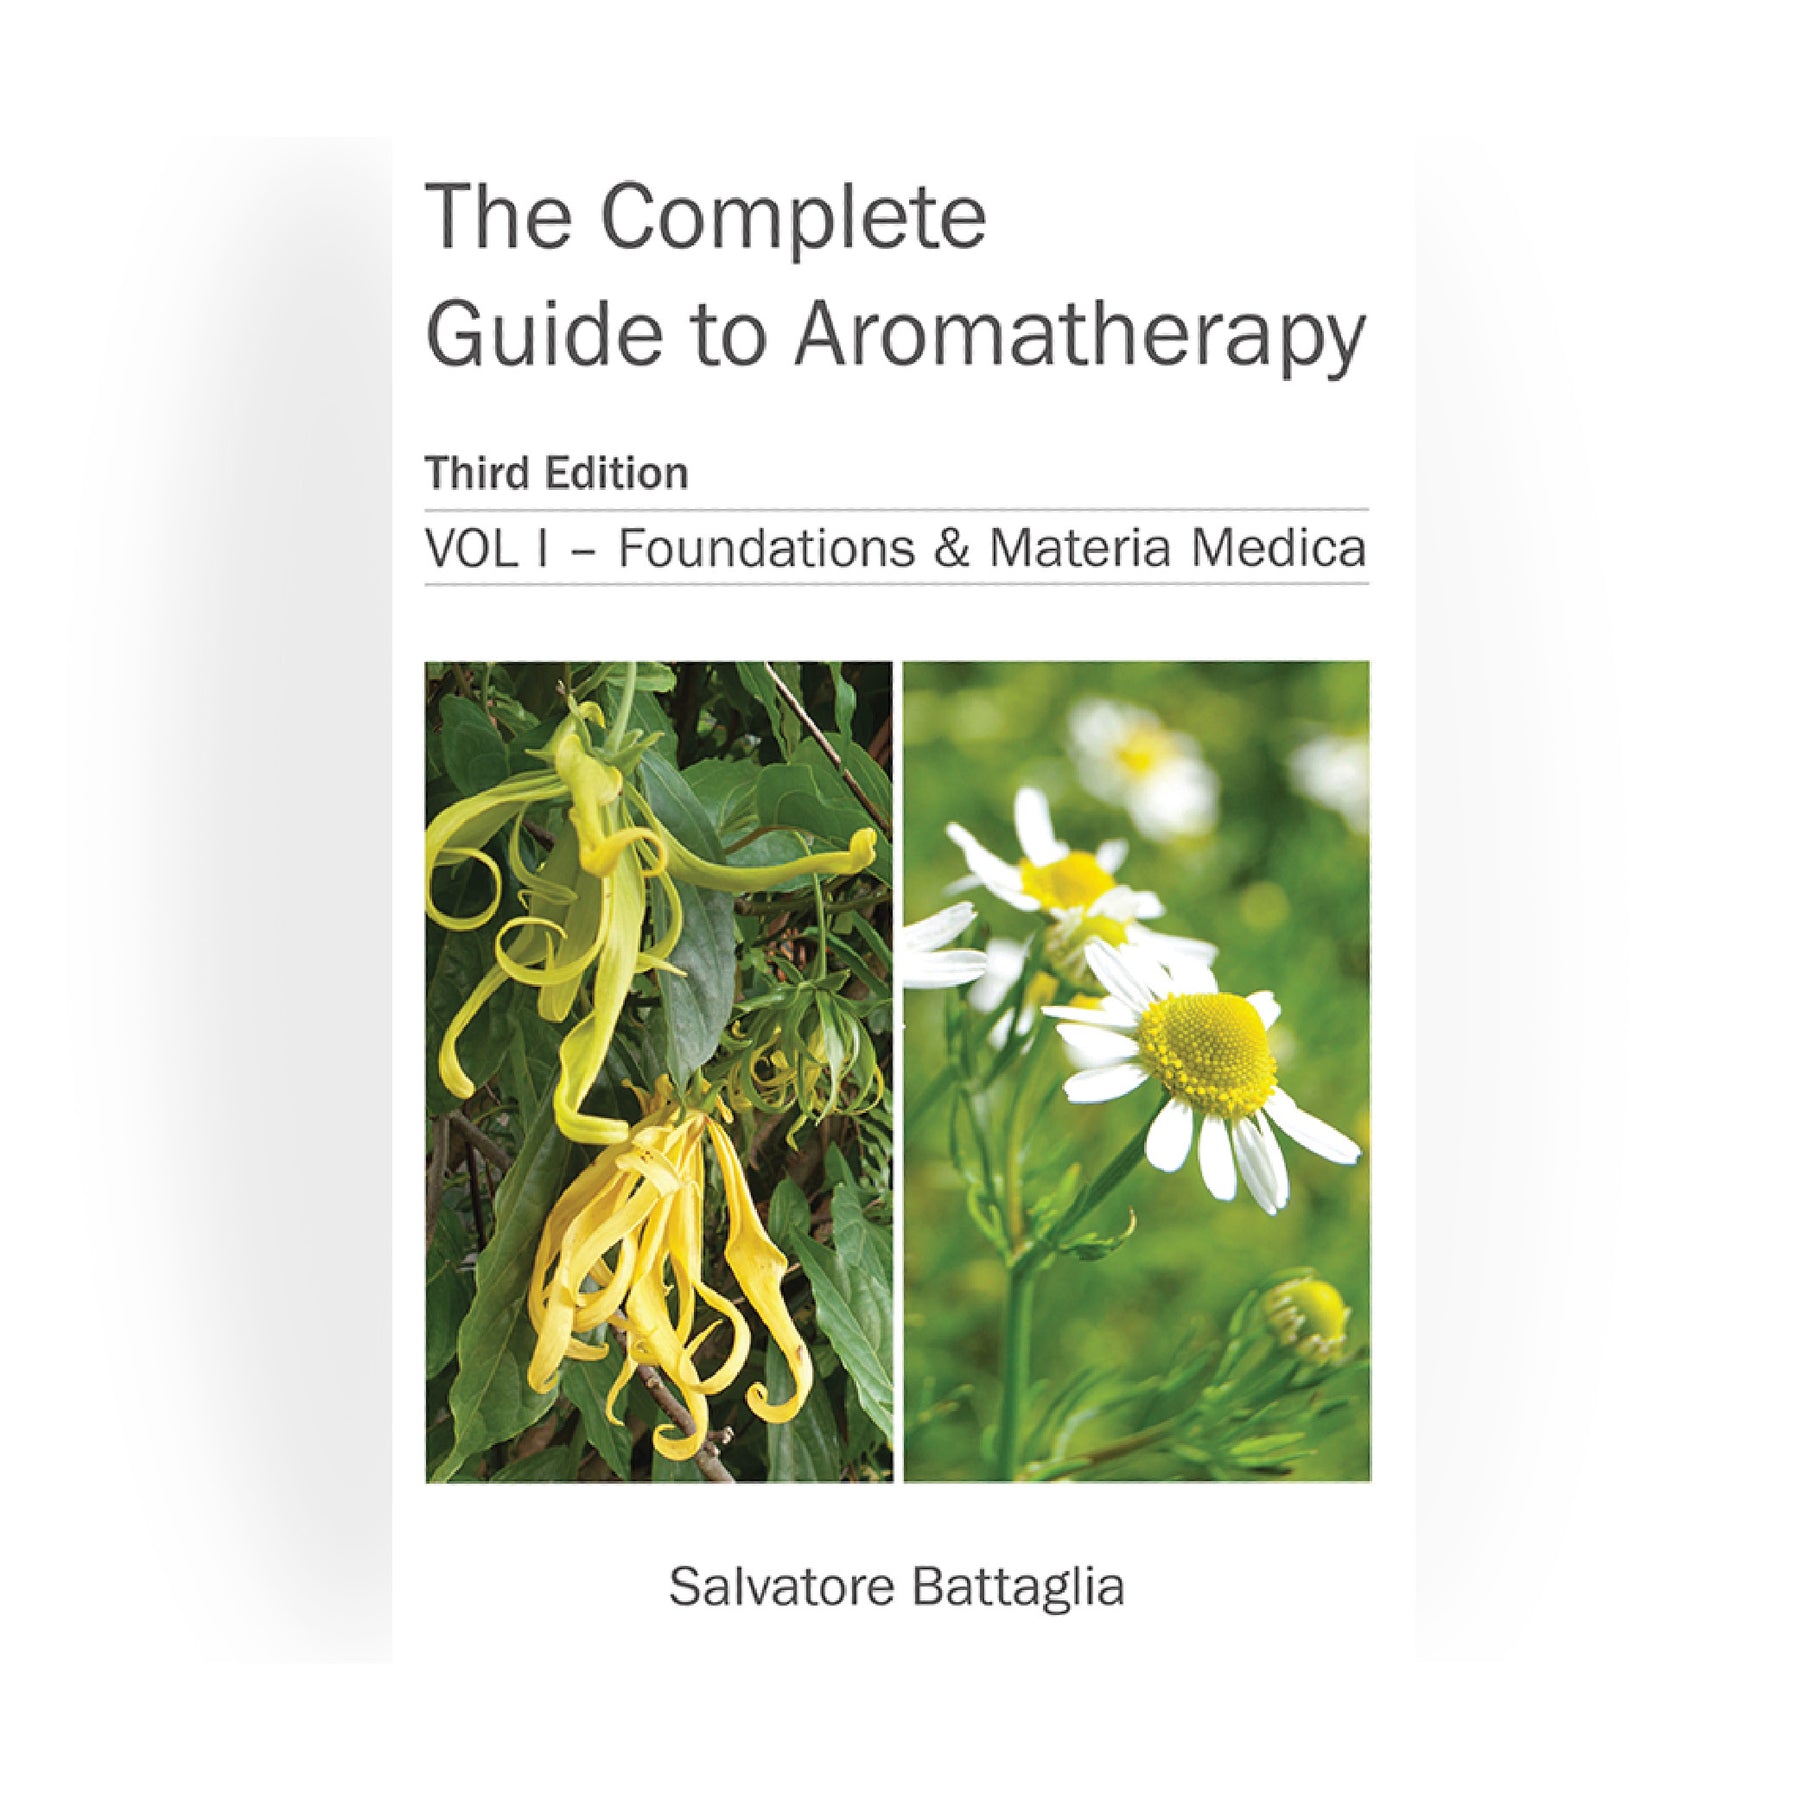 The Complete Guide to Aromatherapy Third Edition Vol I